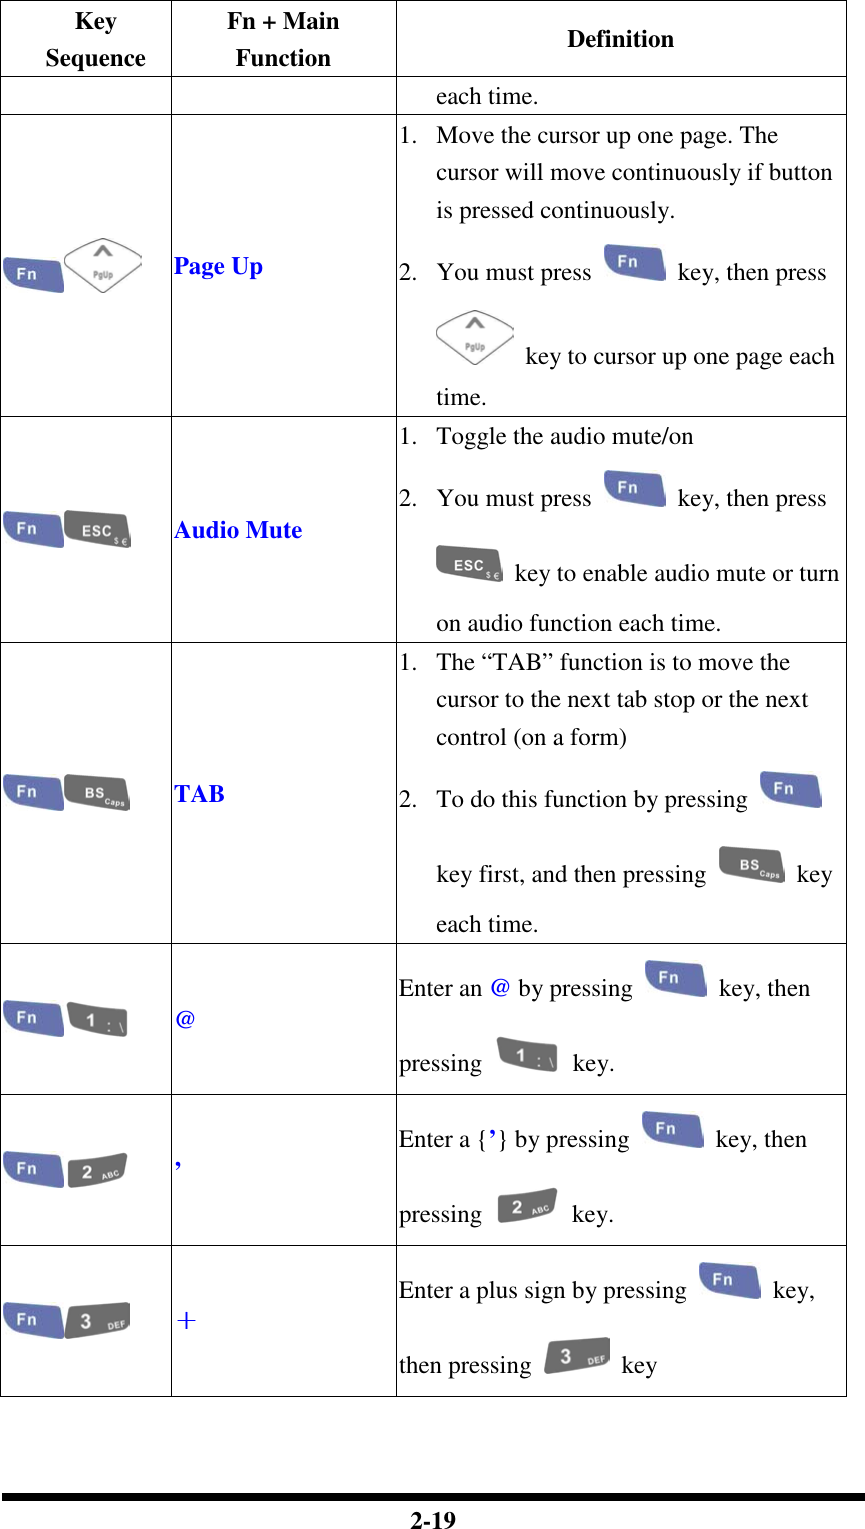  2-19 Key Sequence Fn + Main Function  Definition each time.  Page Up 1. Move the cursor up one page. The cursor will move continuously if button is pressed continuously. 2. You must press    key, then press   key to cursor up one page each time.  Audio Mute 1. Toggle the audio mute/on 2. You must press    key, then press   key to enable audio mute or turn on audio function each time.  TAB 1. The “TAB” function is to move the cursor to the next tab stop or the next control (on a form) 2. To do this function by pressing   key first, and then pressing    key each time.  @ Enter an @ by pressing    key, then pressing    key.  ’ Enter a {’} by pressing    key, then pressing    key.  ＋＋＋＋ Enter a plus sign by pressing    key, then pressing    key 